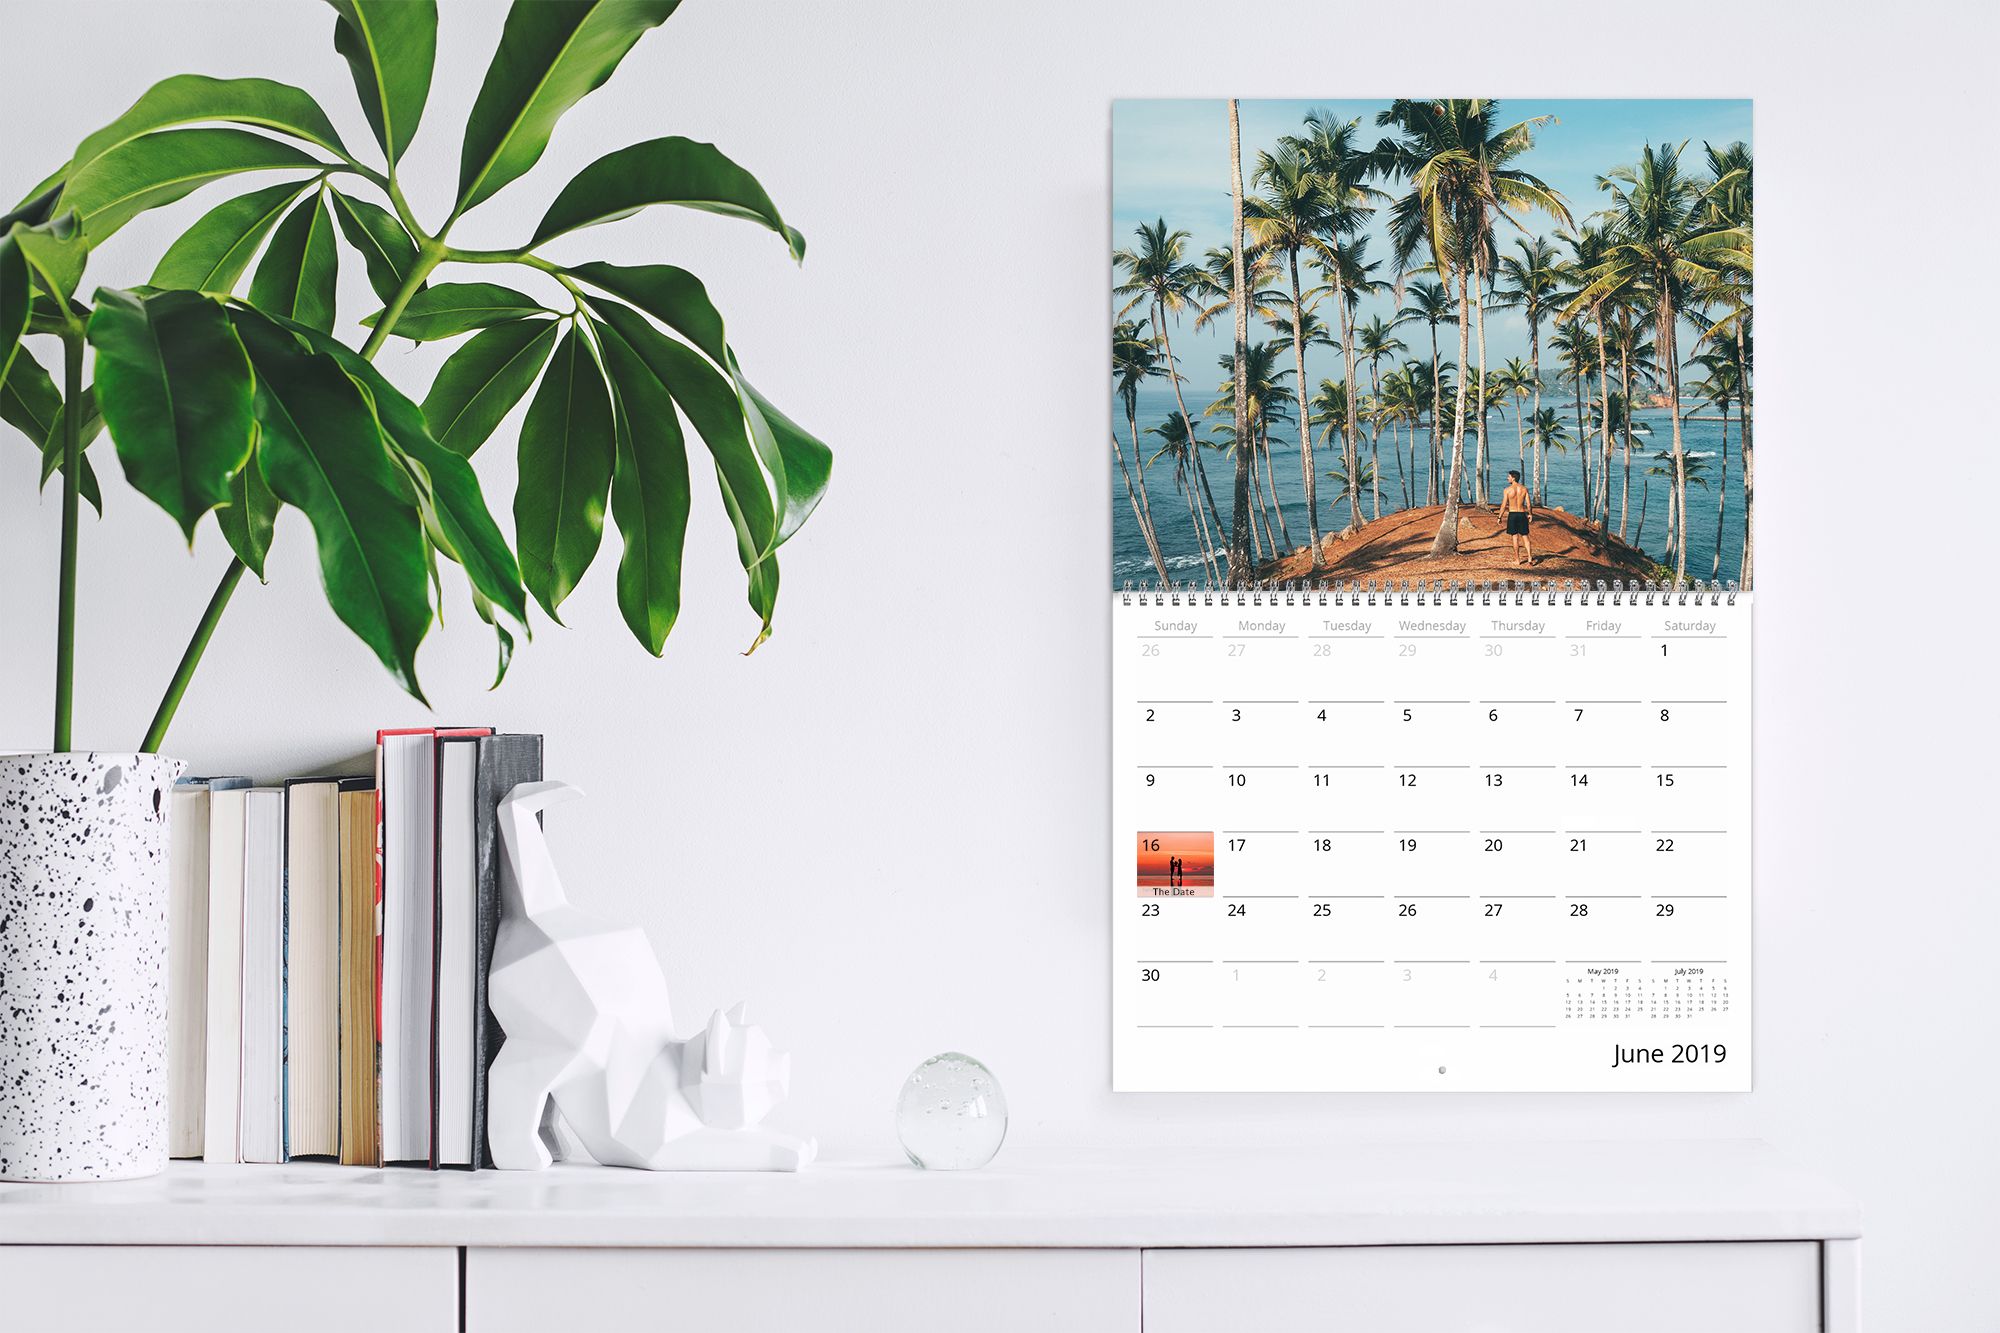 Calendars are a creative way to display your photos